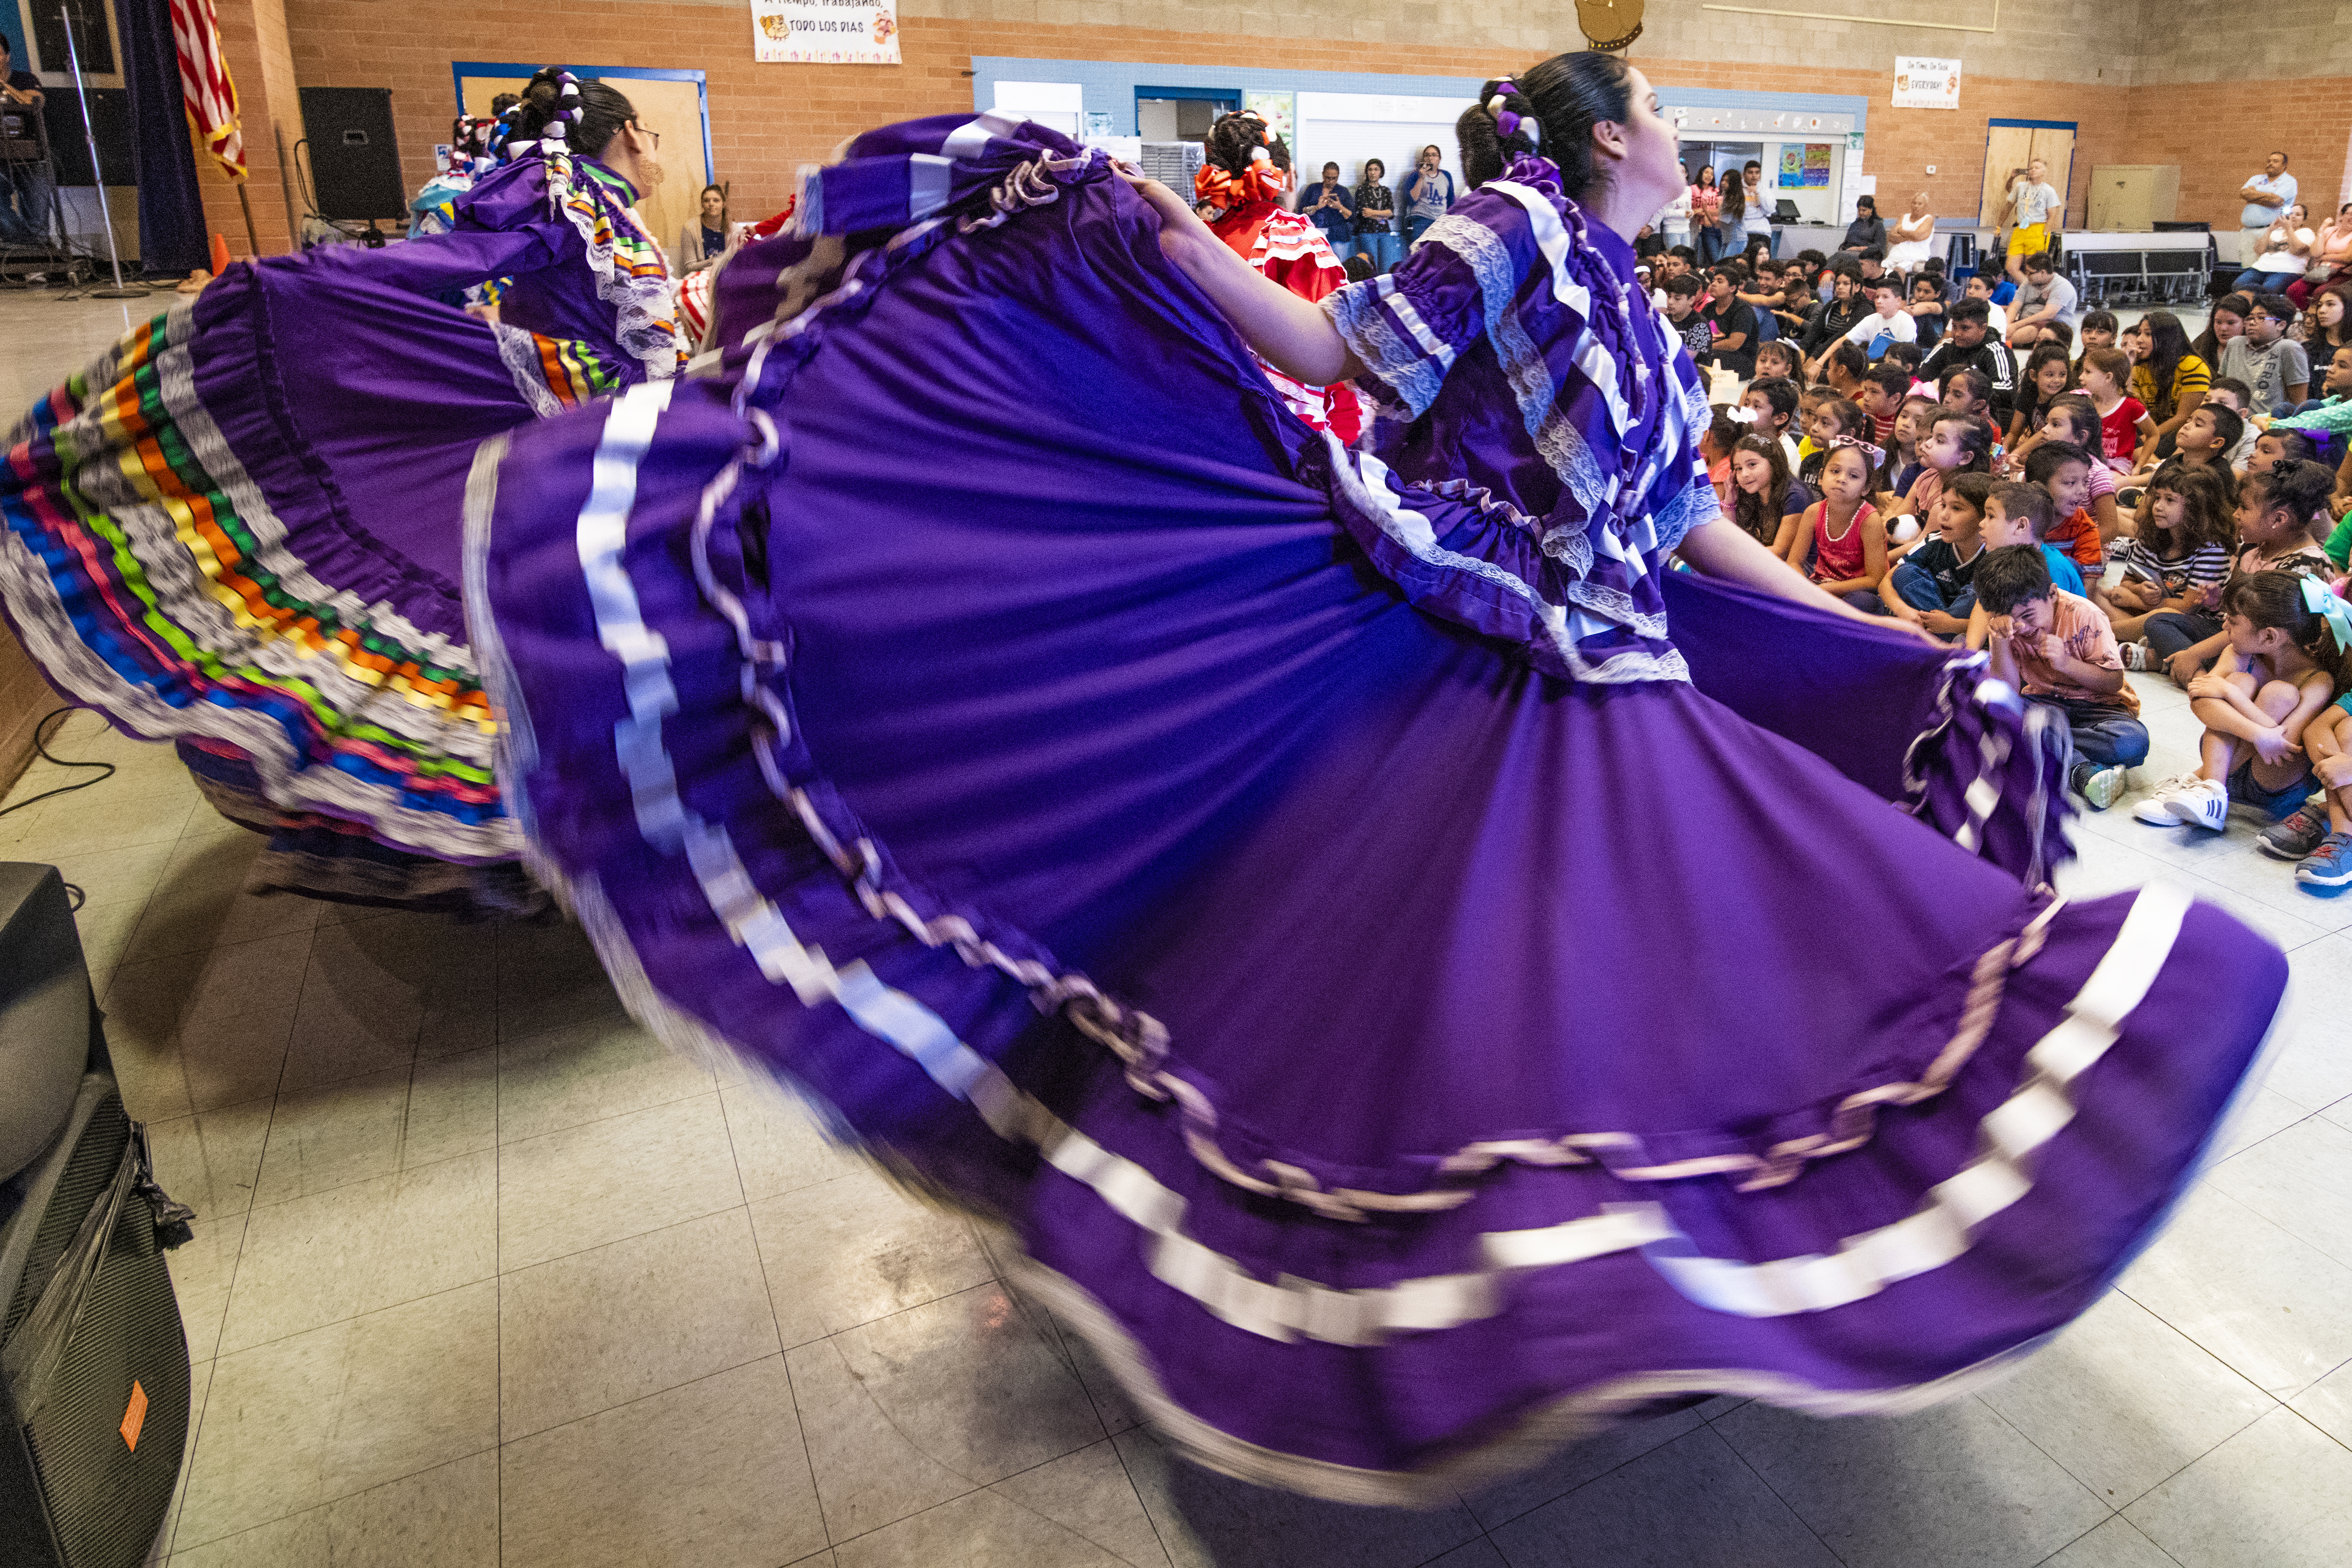 Folklorico dancers in purple dresses perform for students